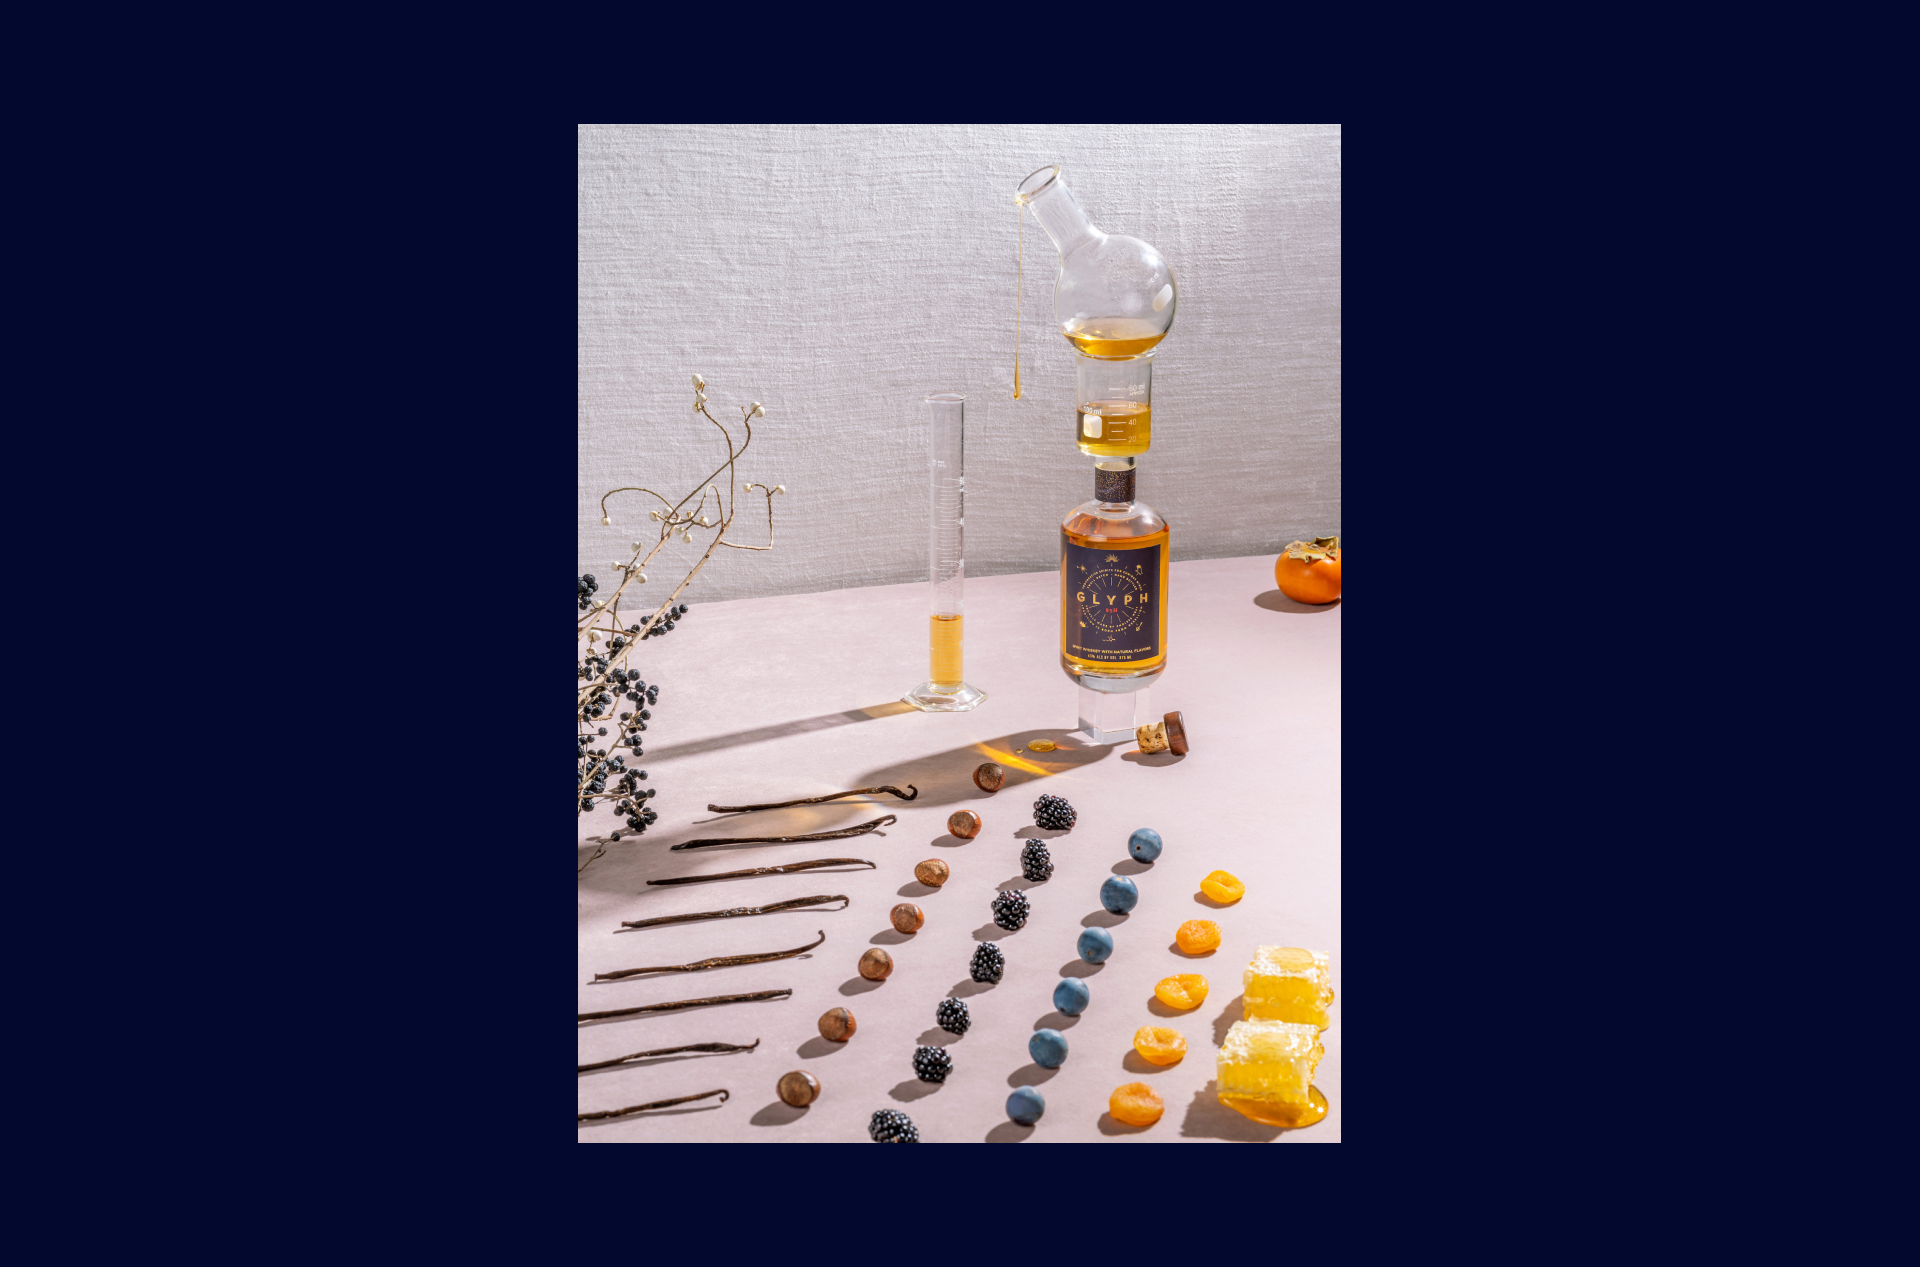 Still life photo of the Glyph bottle, fruits and test tubes